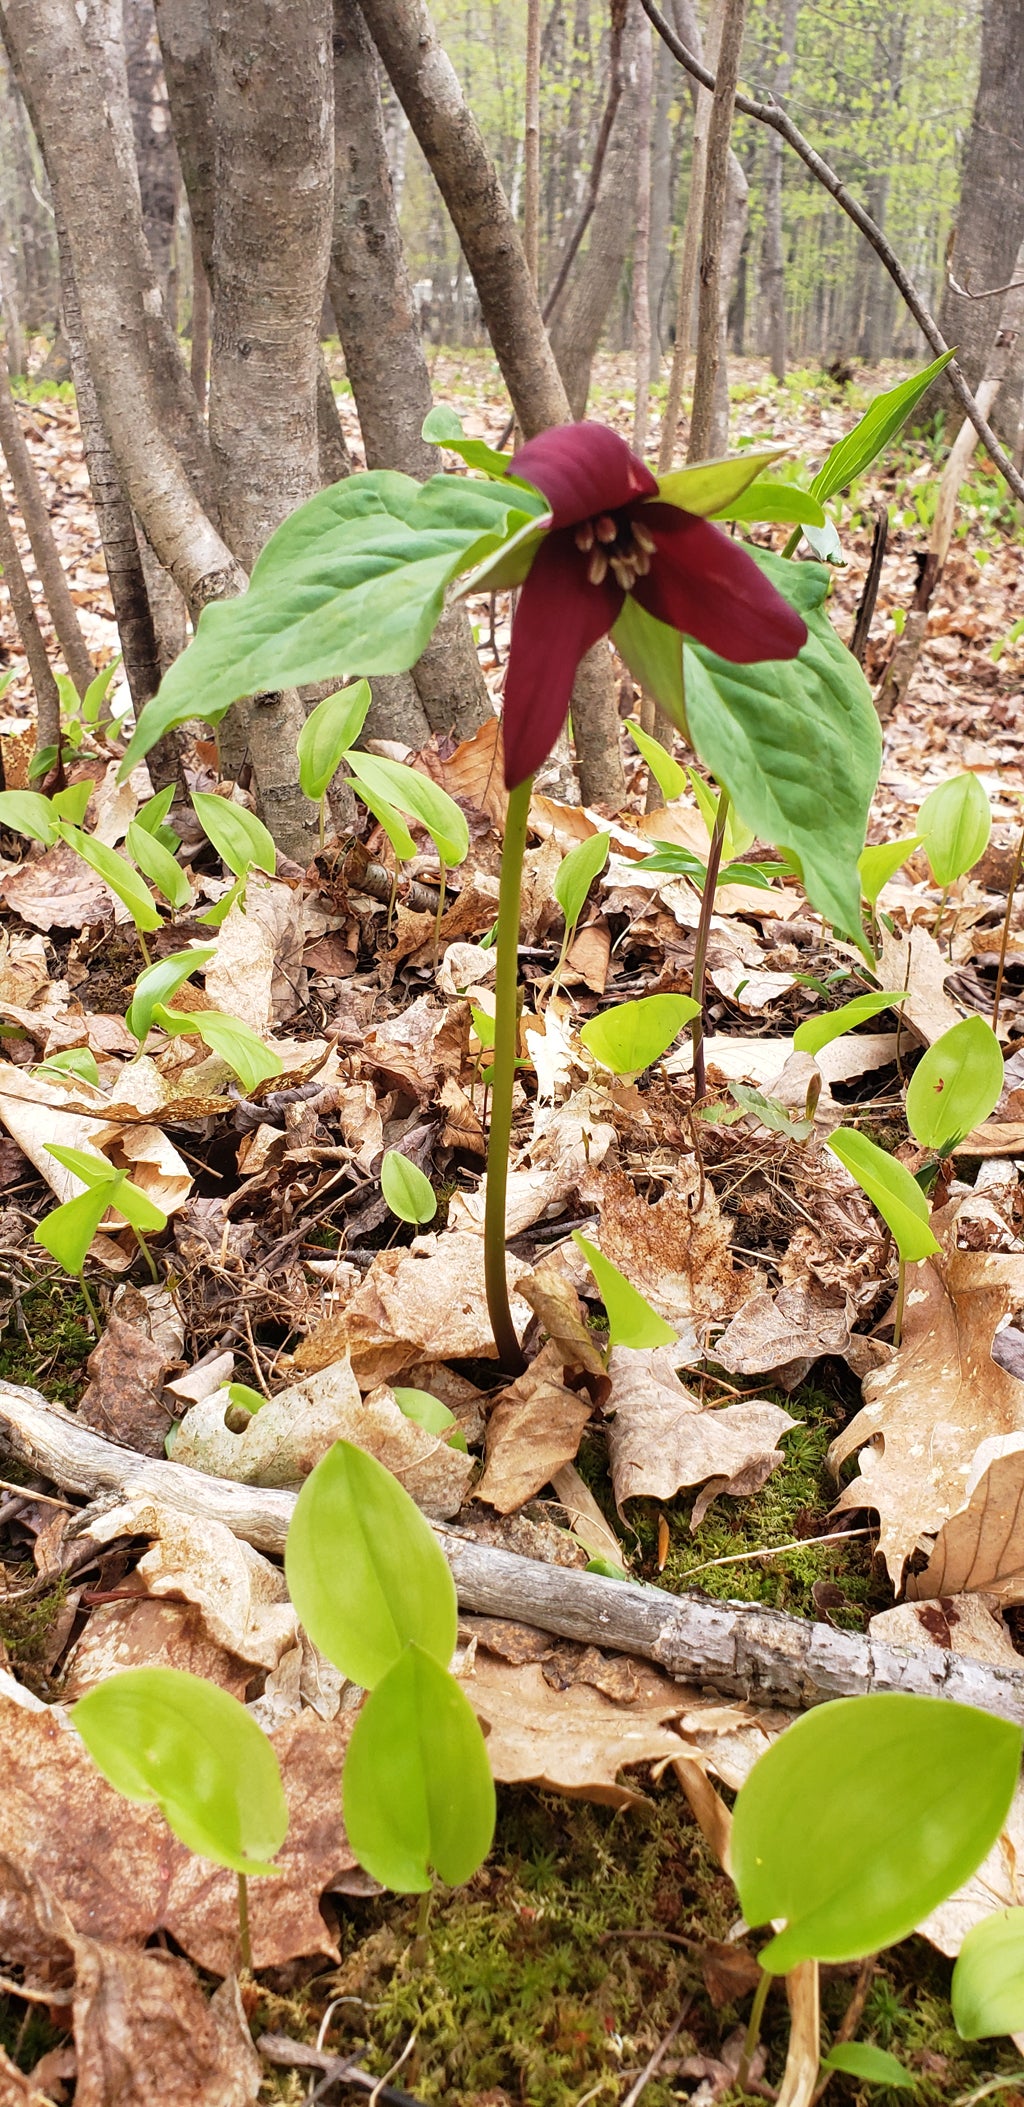 Trillium were starting to bloom in the woods behind Blackberry Crossing 12A